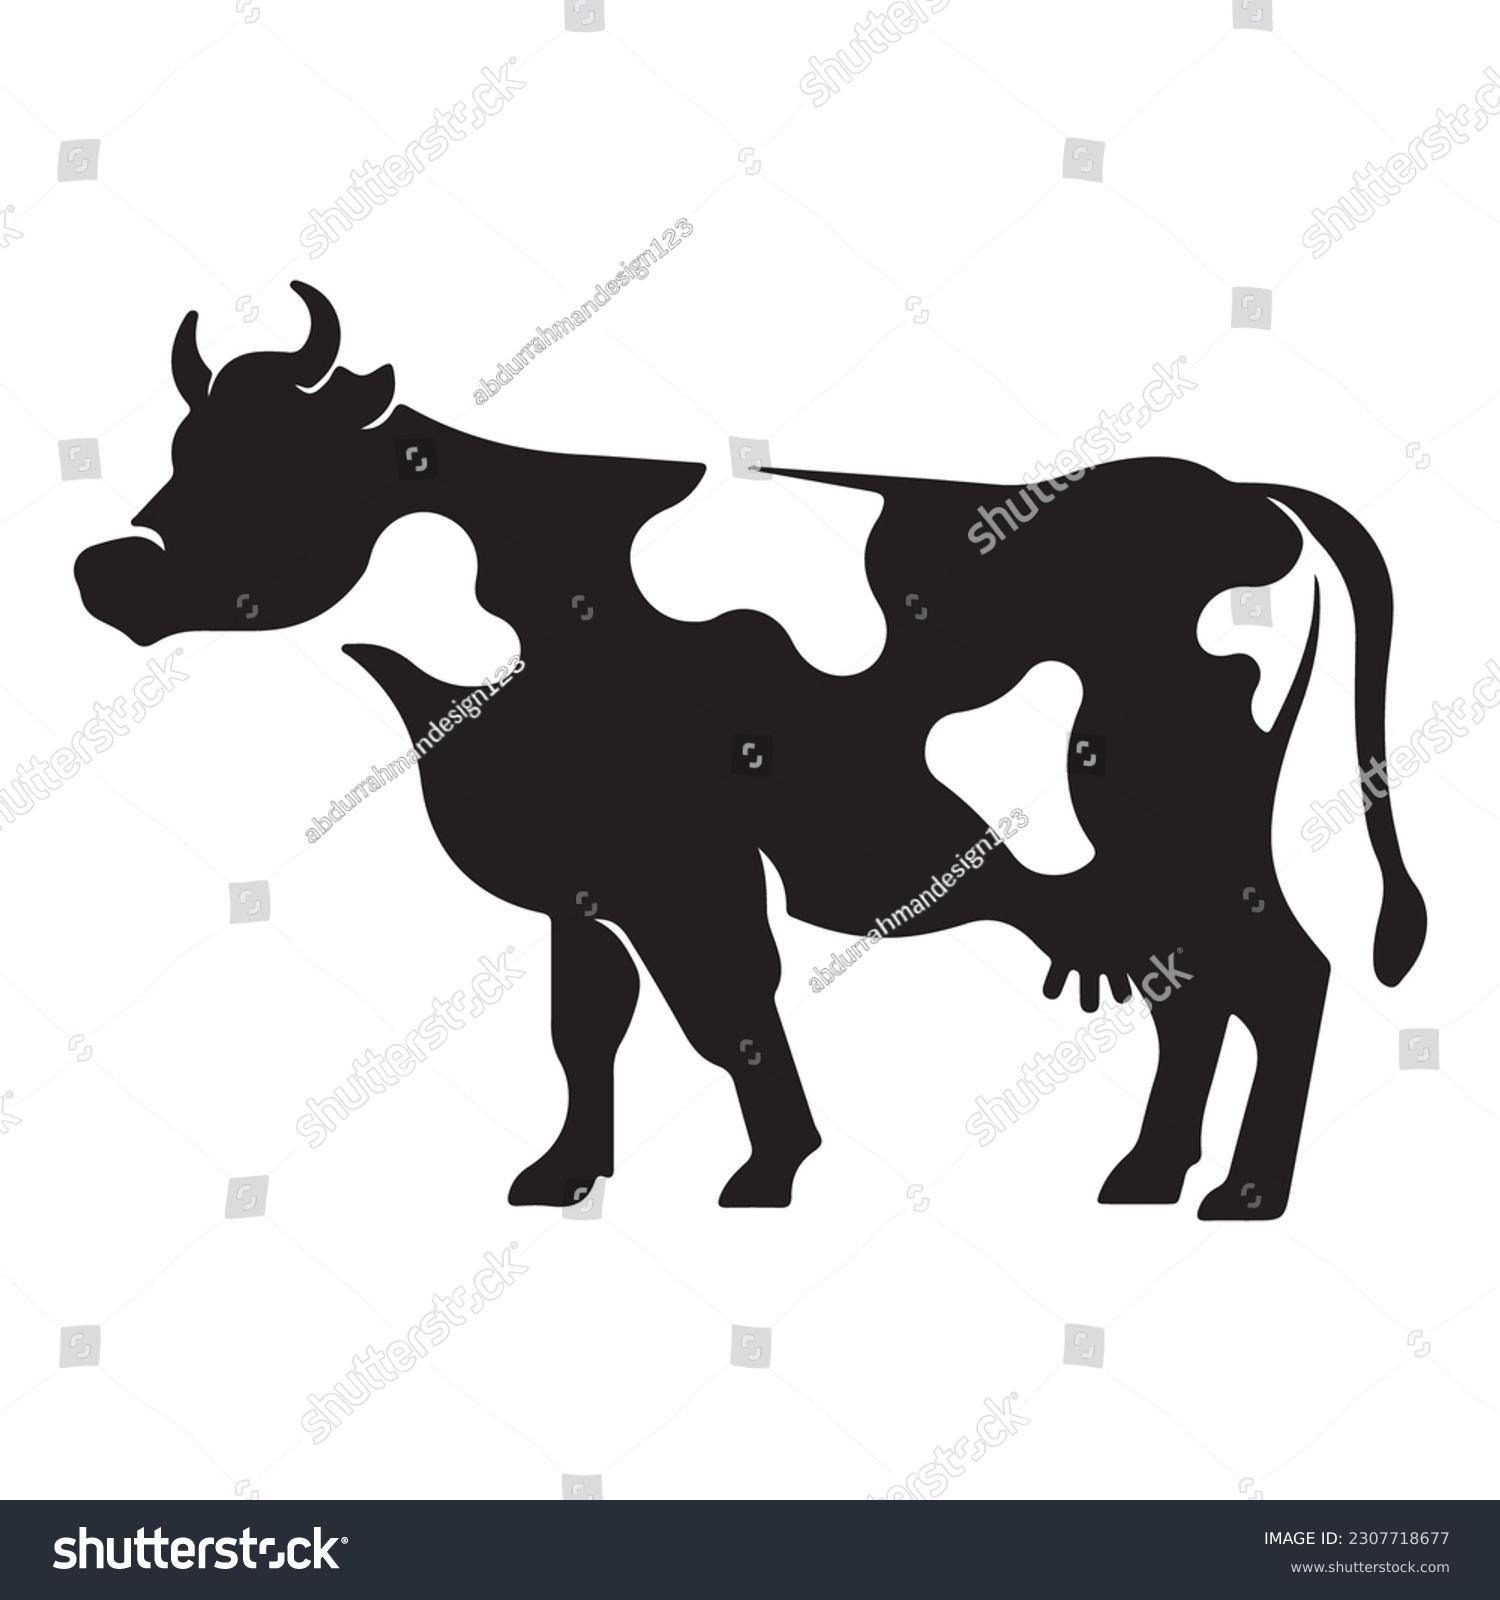 SVG of Do you love cows? If so, then you will love this cow silhouette stencil art! This product includes high-resolution svg files that you can use with your cricut or other cutting machine to create beauti svg